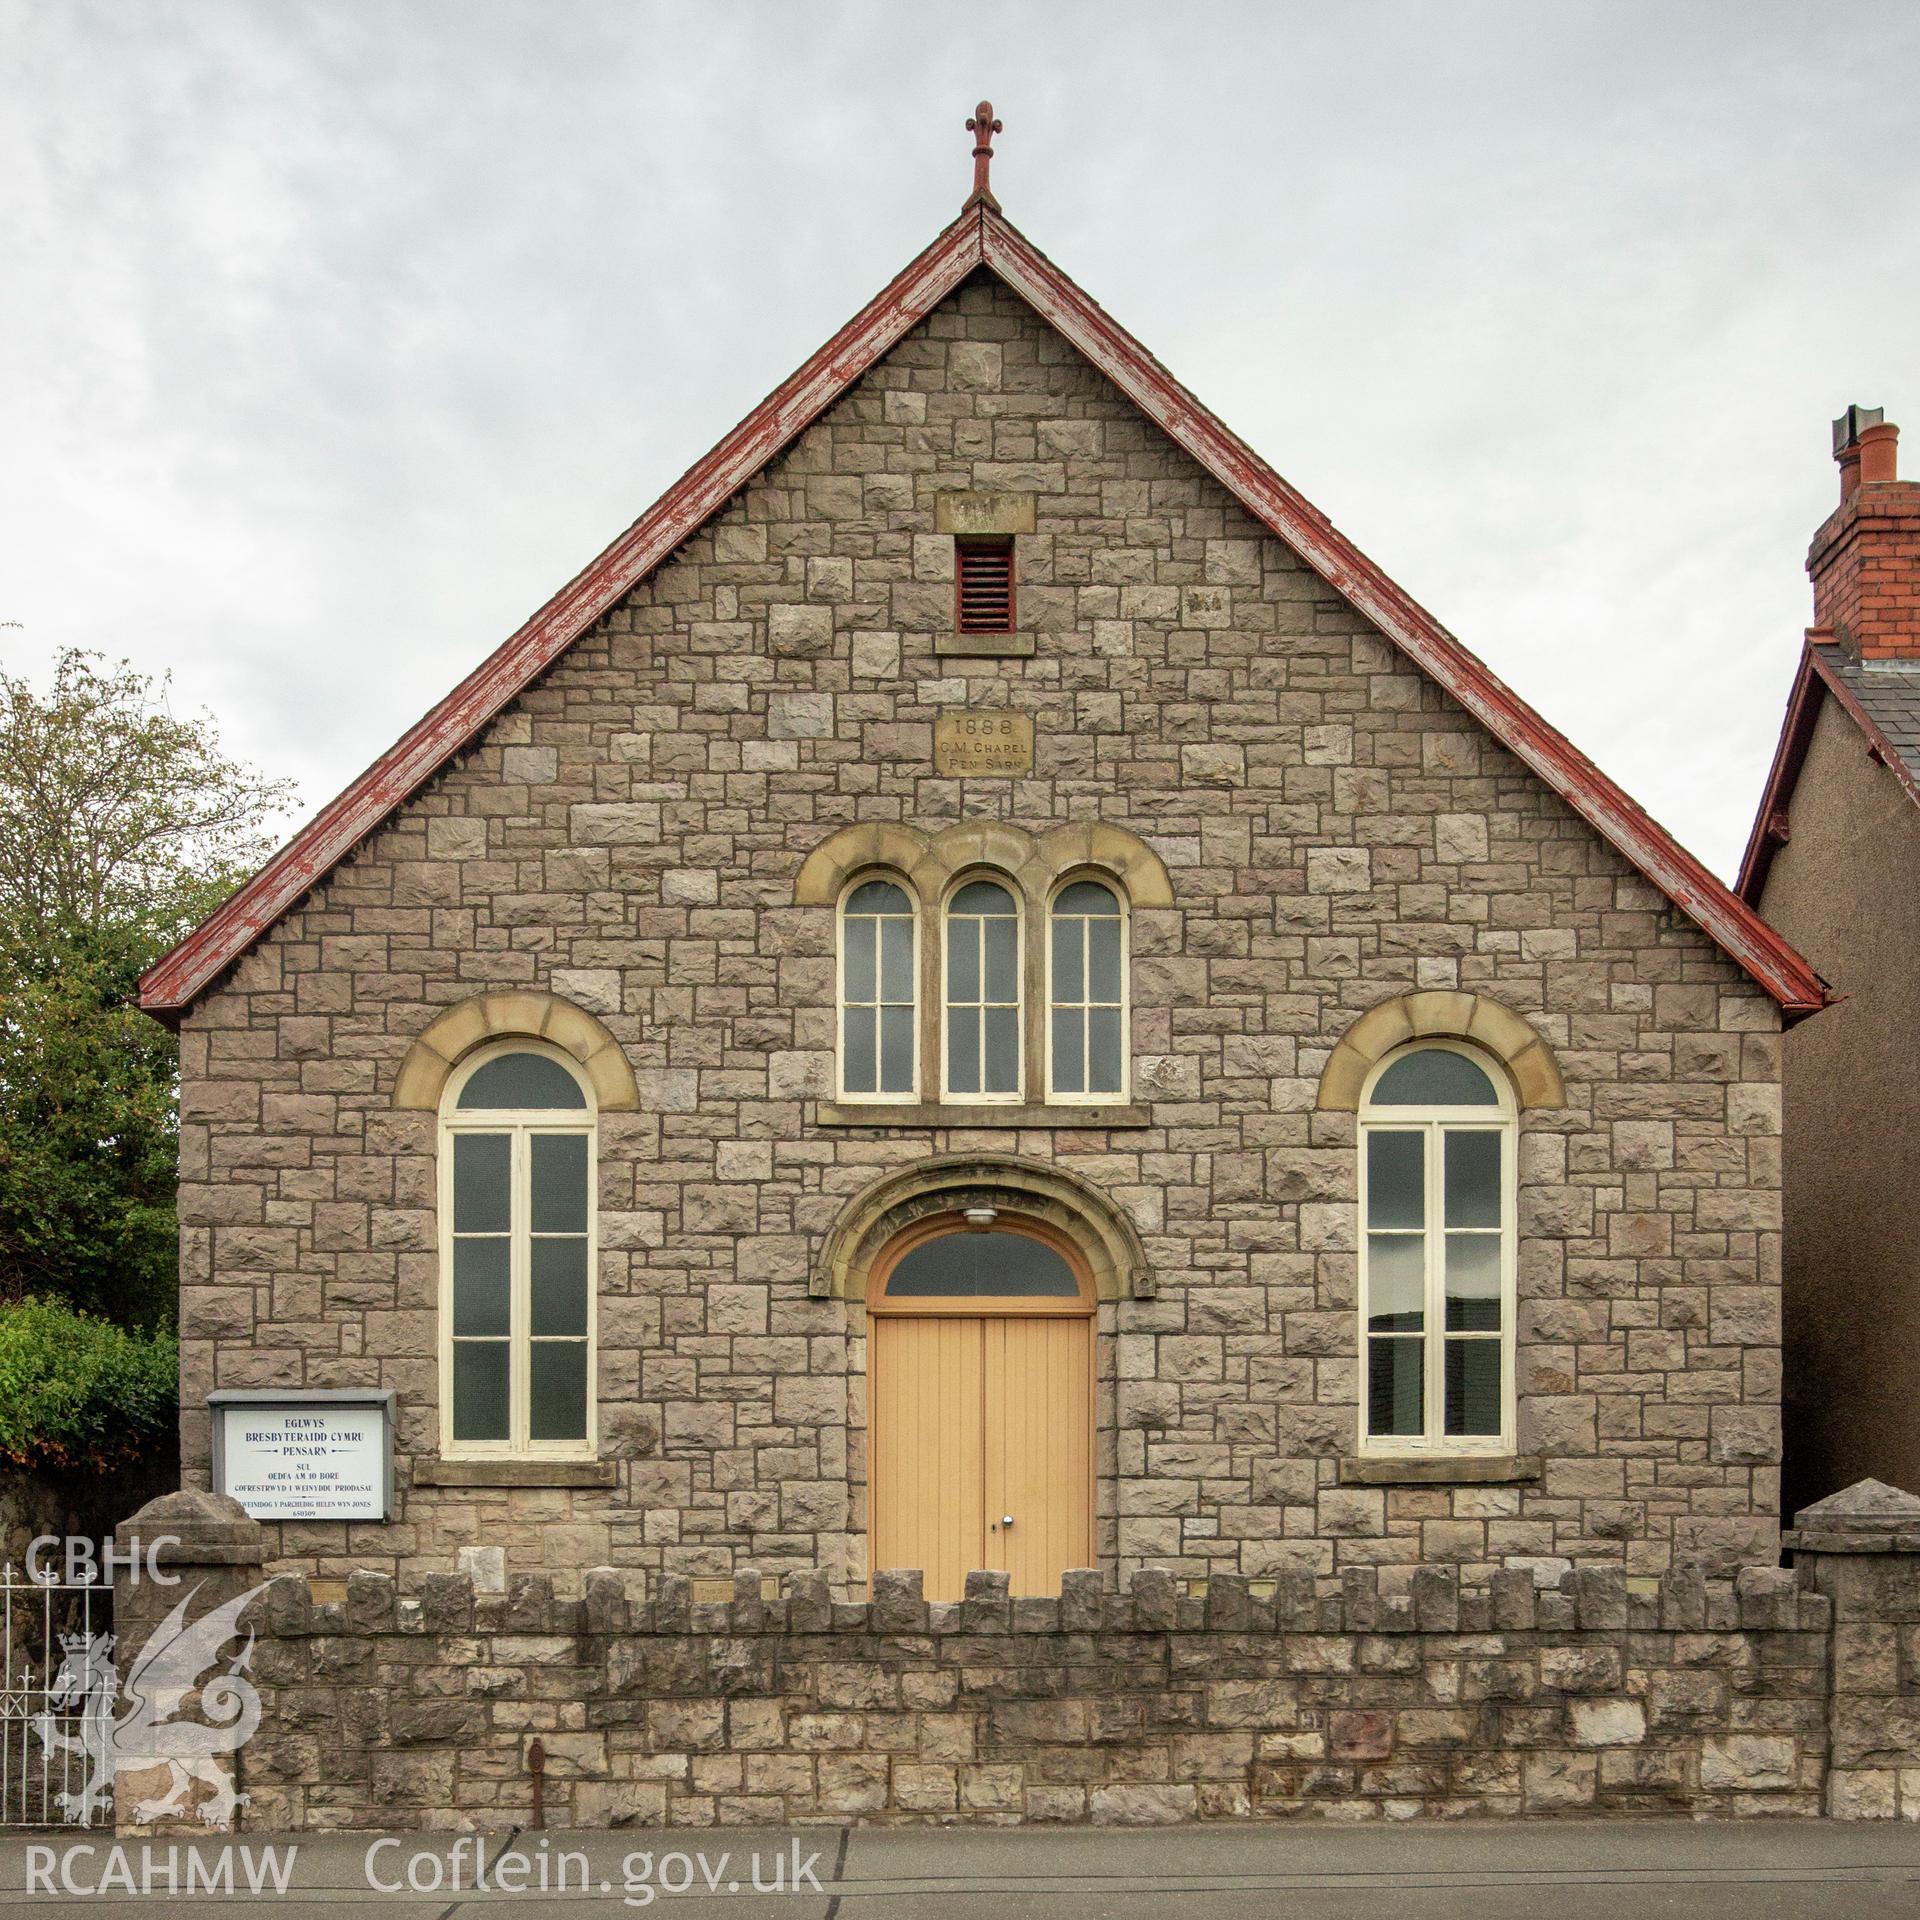 Colour photograph showing front elevation and entrance of Pen-Sarn Welsh Calvinistic Methodist chapel, Conwy Road, Llandudno Junction. Photographed by Richard Barrett on 17th September 2018.